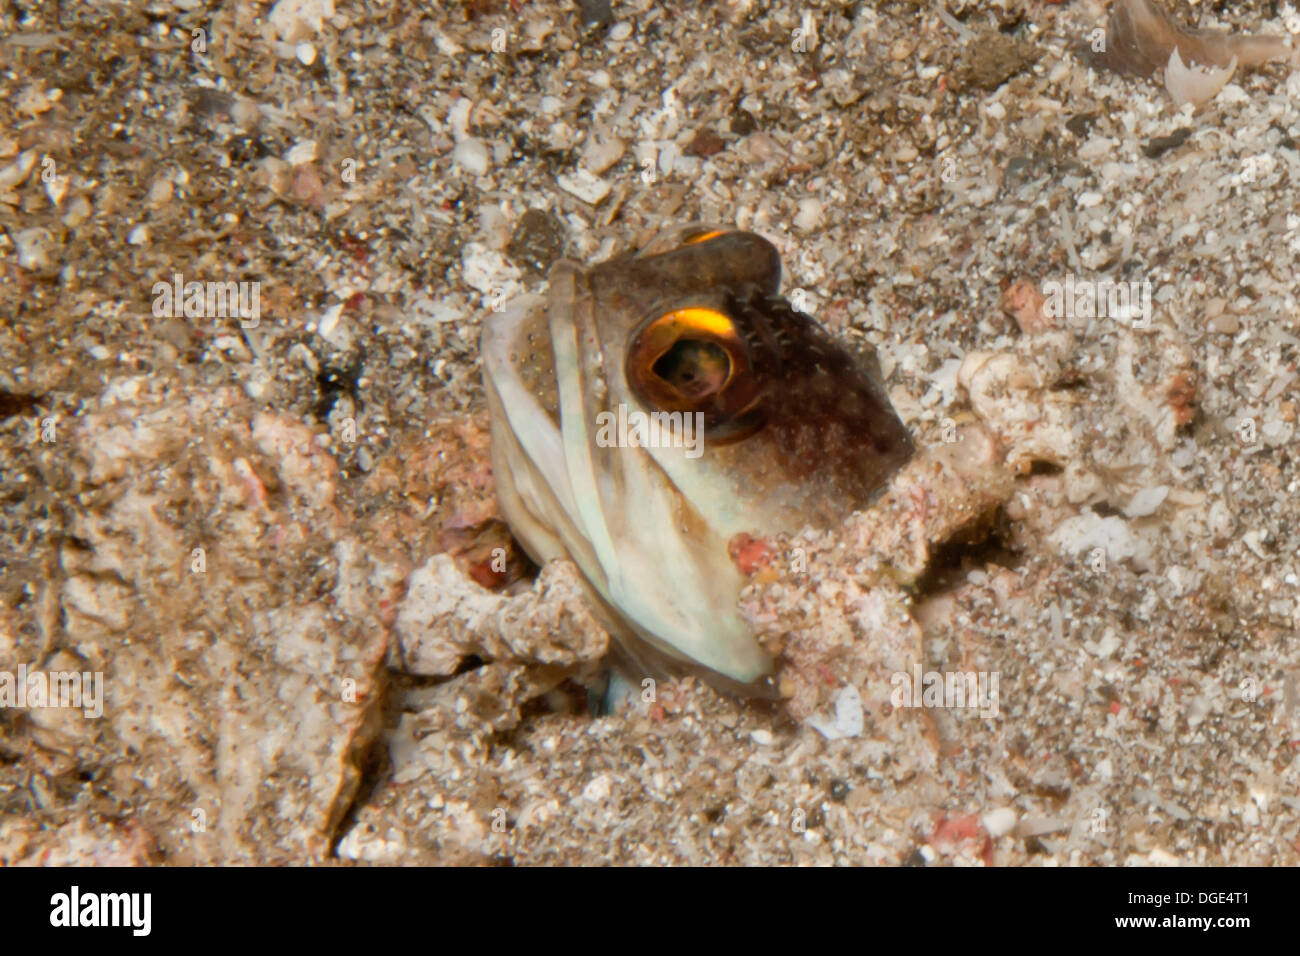 Yellowbarred Jawfish with mounth full of eggs it is breeding buried in the sand.(Opistognathus sp.).Lembeh Straits, Indonesia Stock Photo